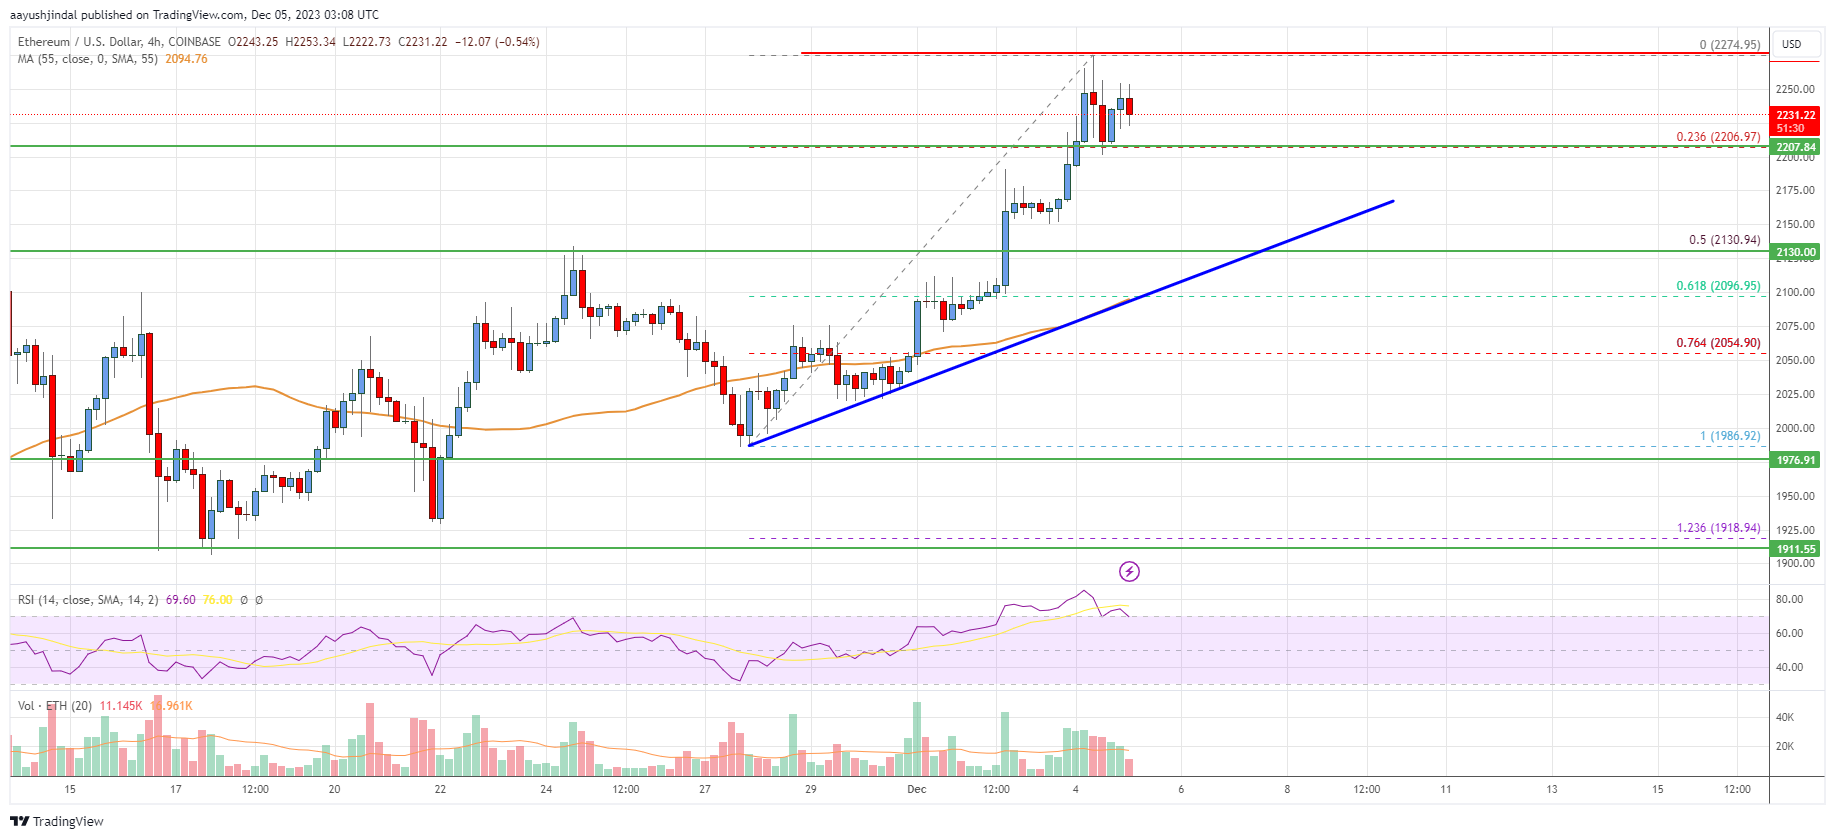 Ethereum Price Bull Run Could Extend By 5%, Why ETH Could Rally To $2,500